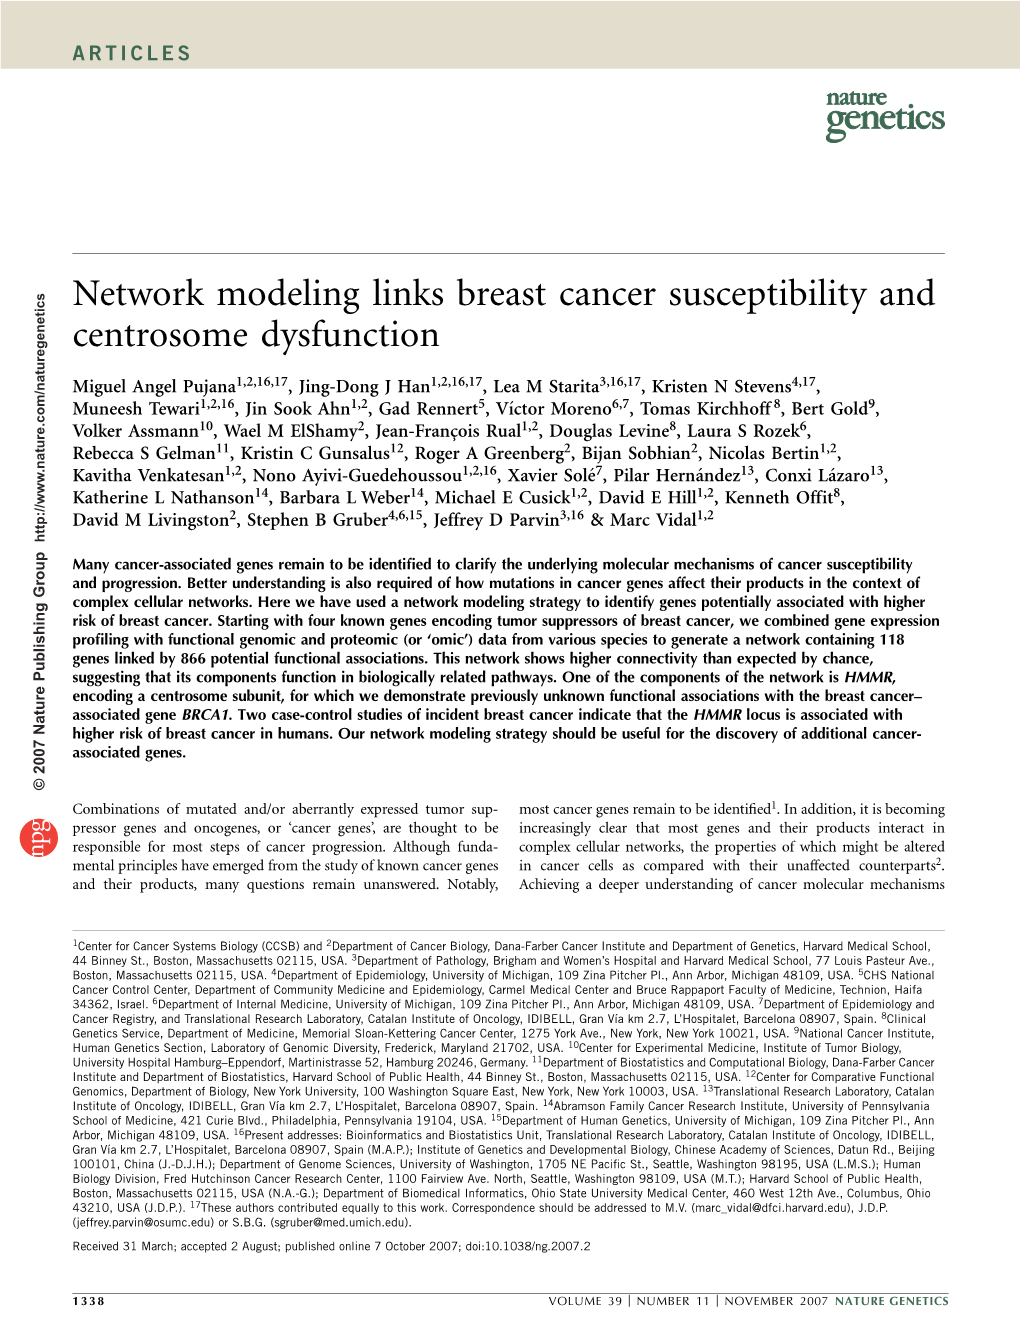 Network Modeling Links Breast Cancer Susceptibility and Centrosome Dysfunction